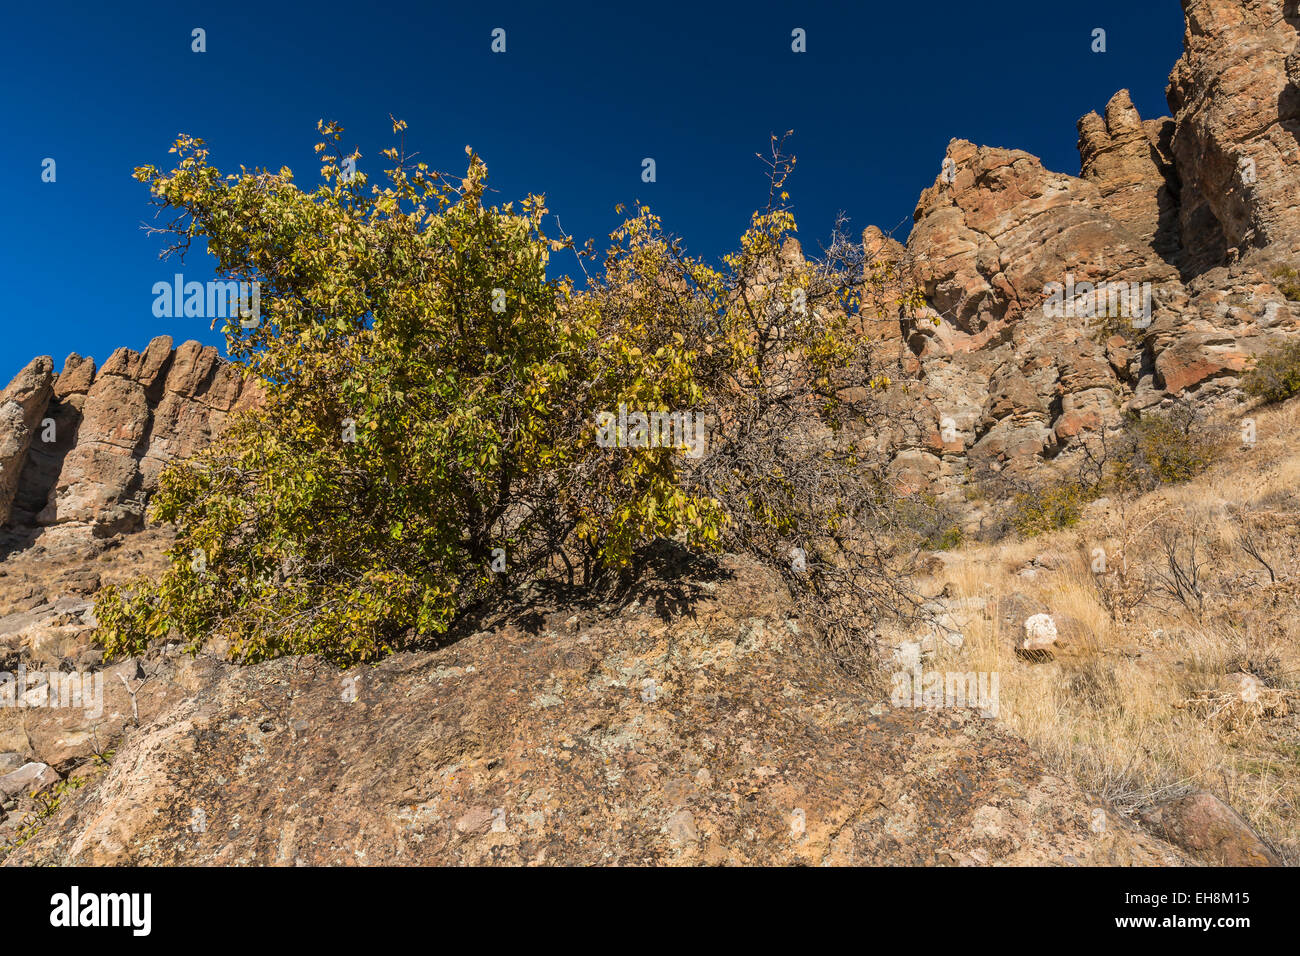 Netleaf Hackberry, Celtis reticulata, growing below The Palisades in John Day Fossil Beds National Monument, Oregon, USA Stock Photo